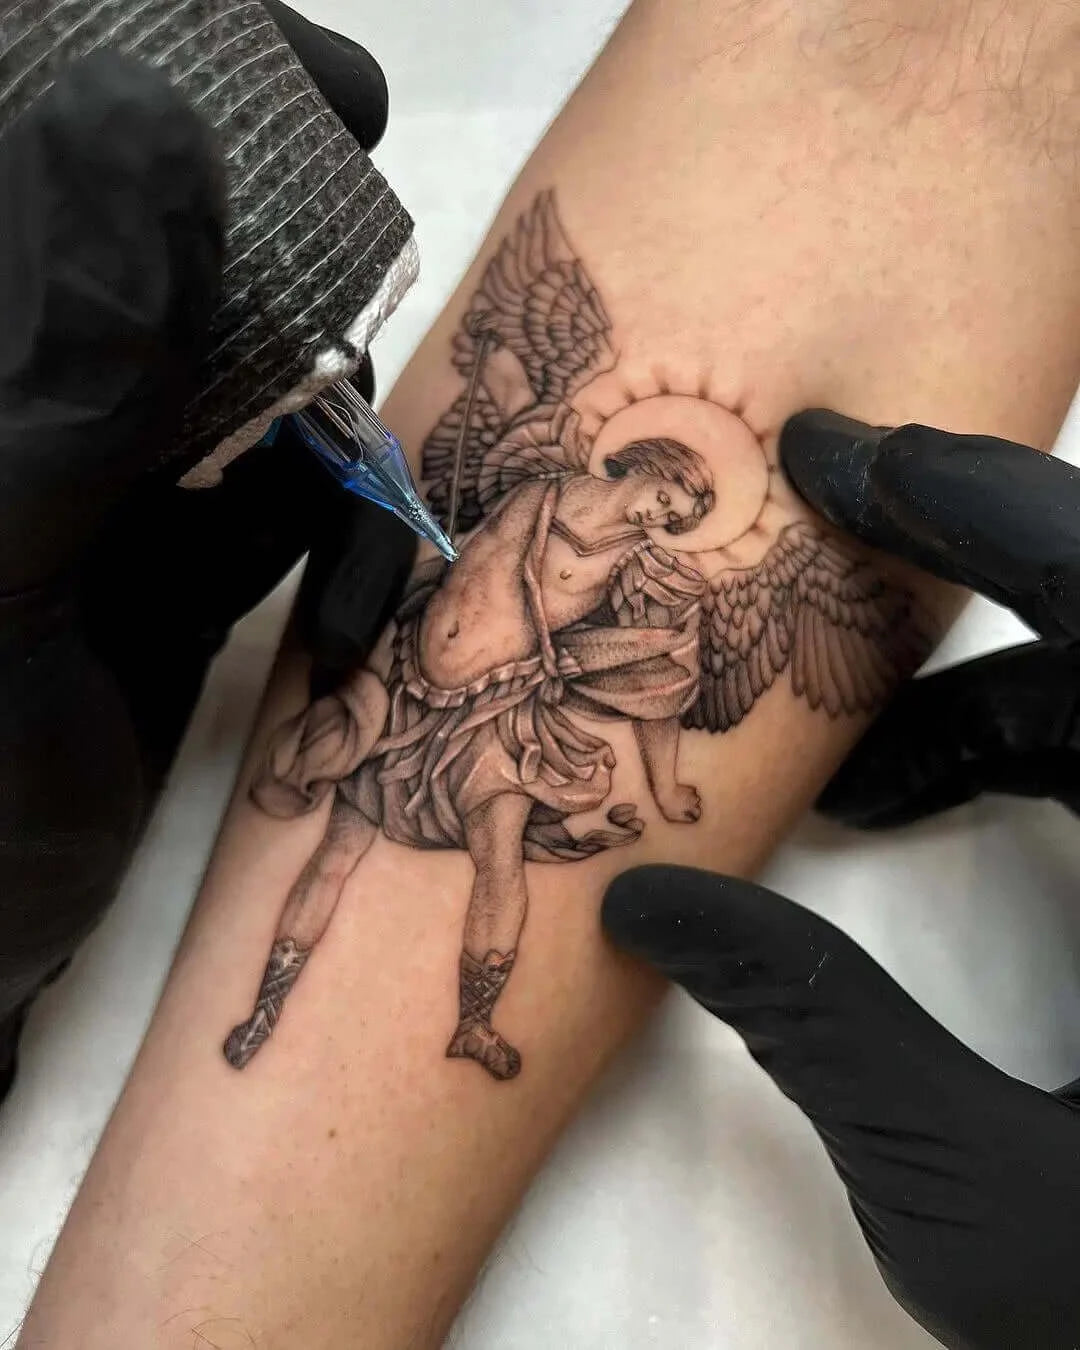 A tattoo work created by EMALLA ELIOT cartridges needles